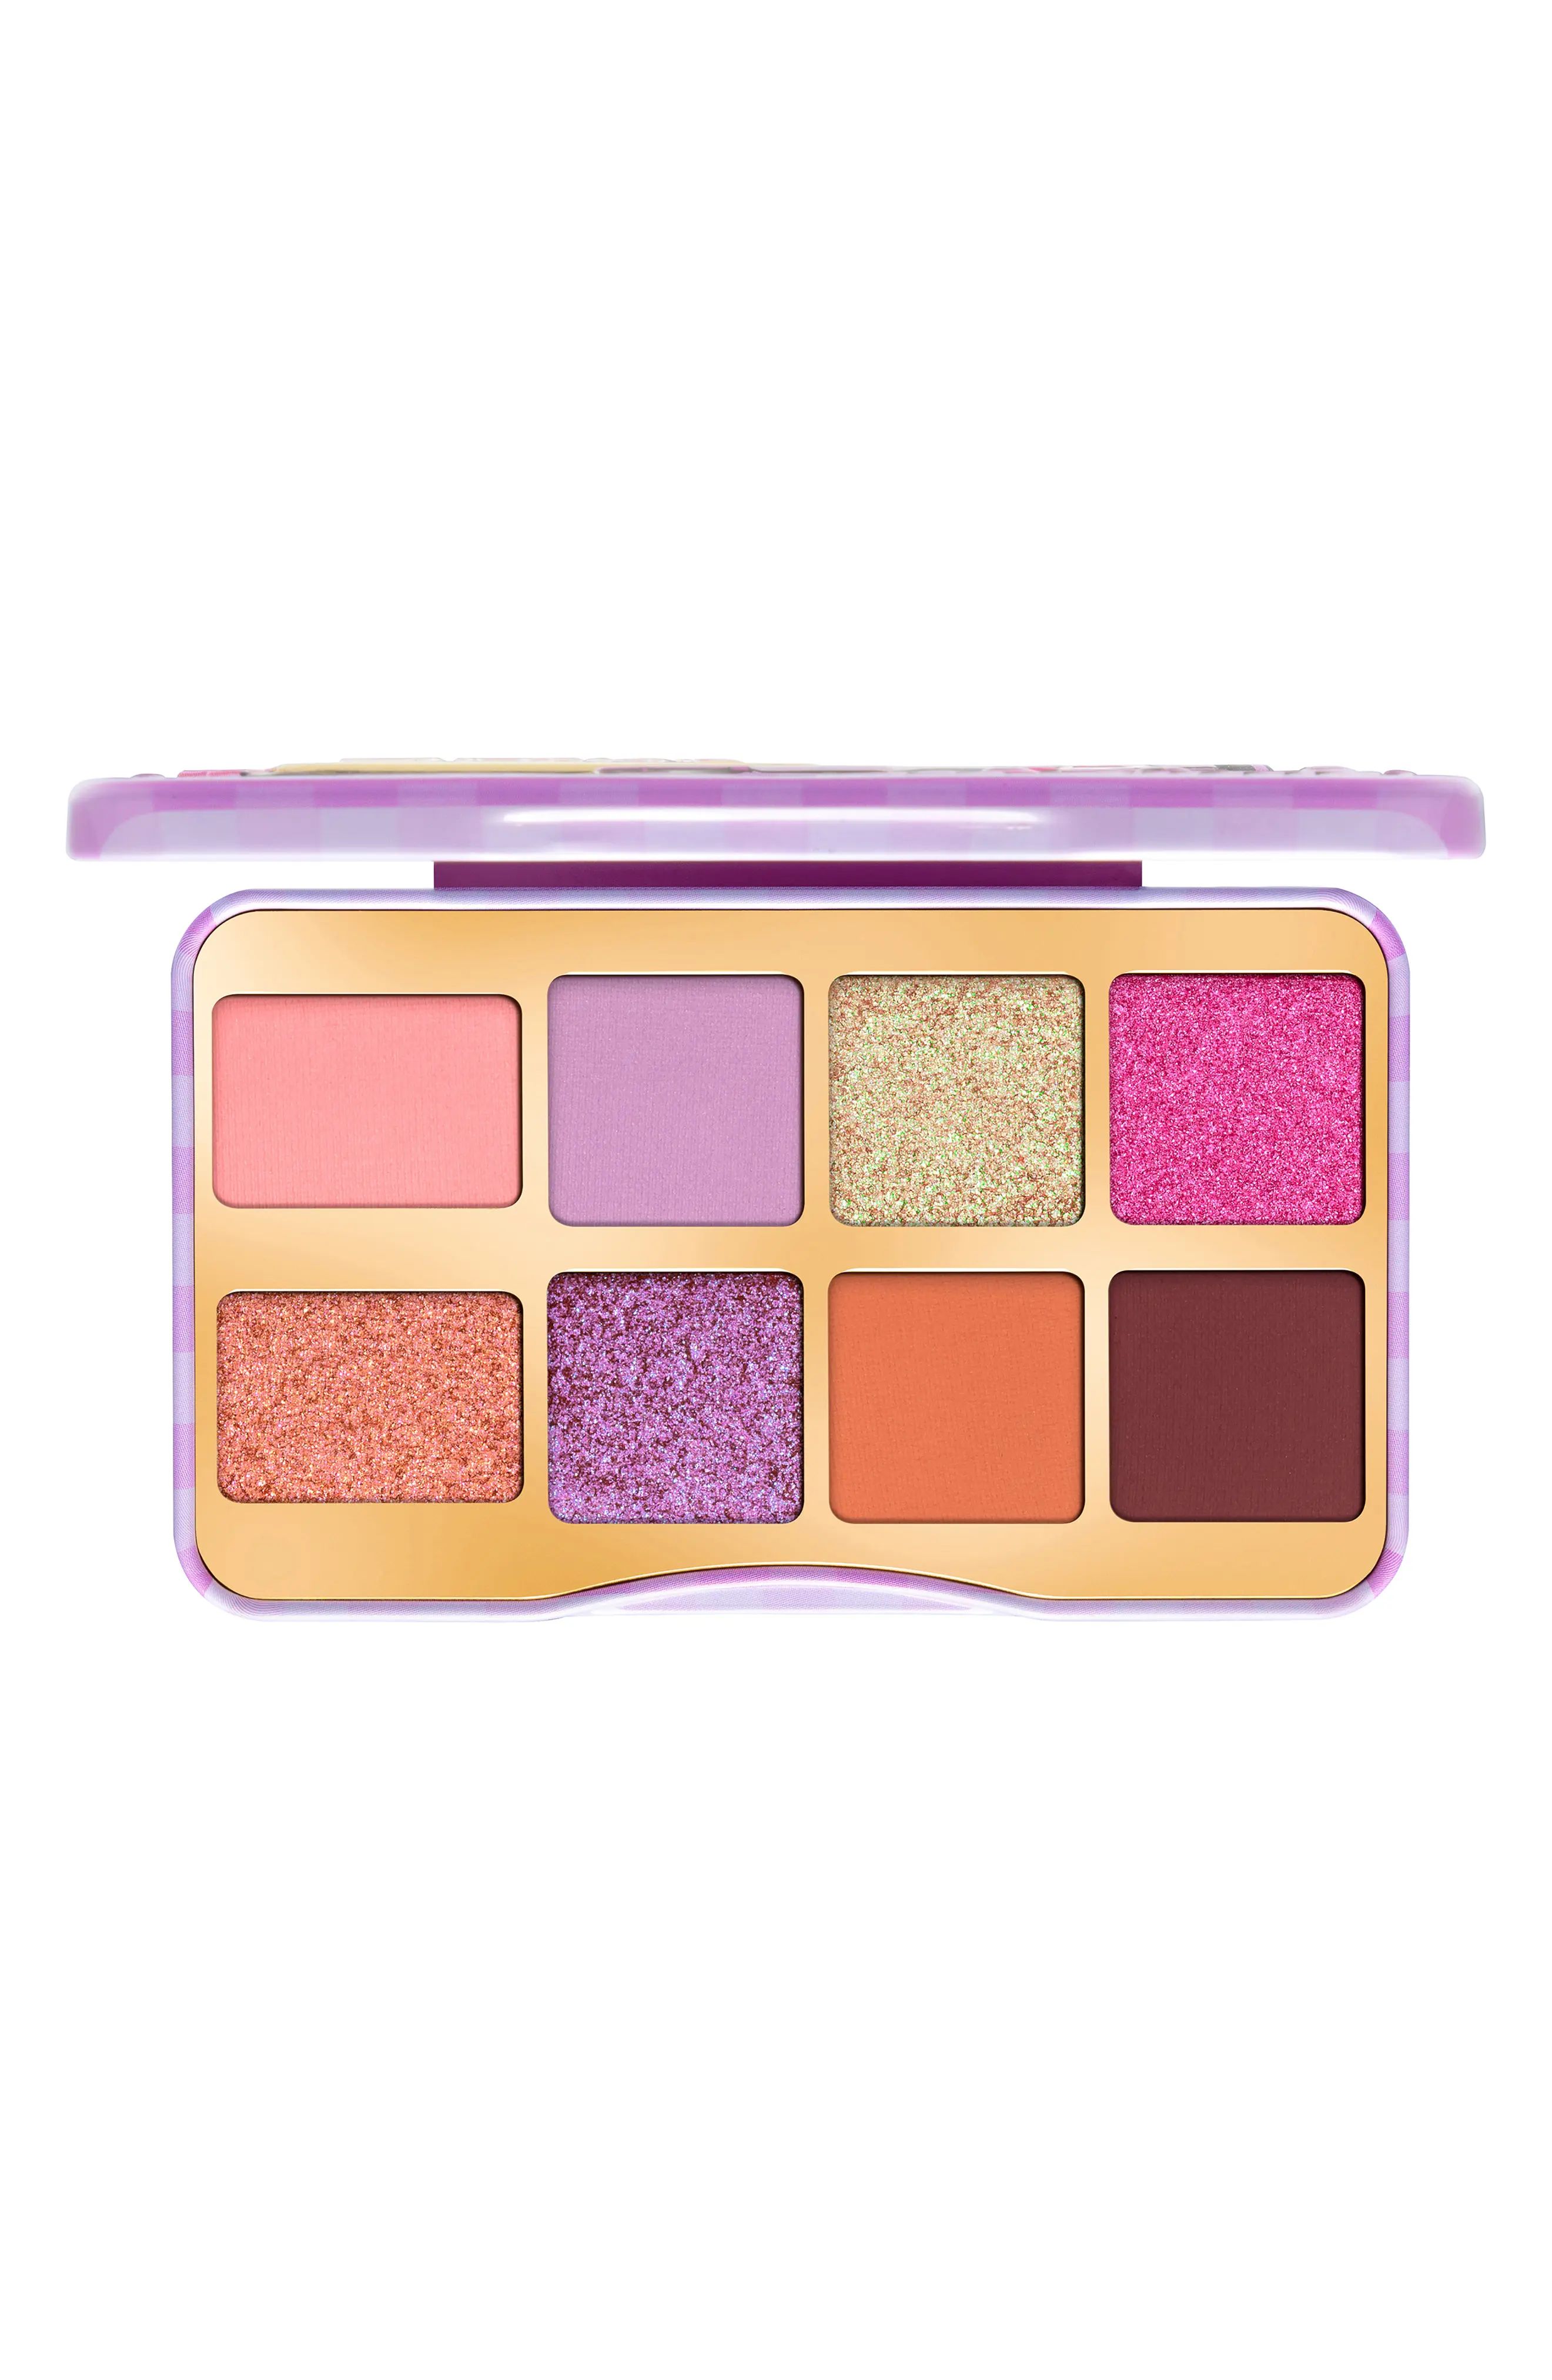 Too Faced That's My Jam Mini Eyeshadow Palette - No Color | Nordstrom